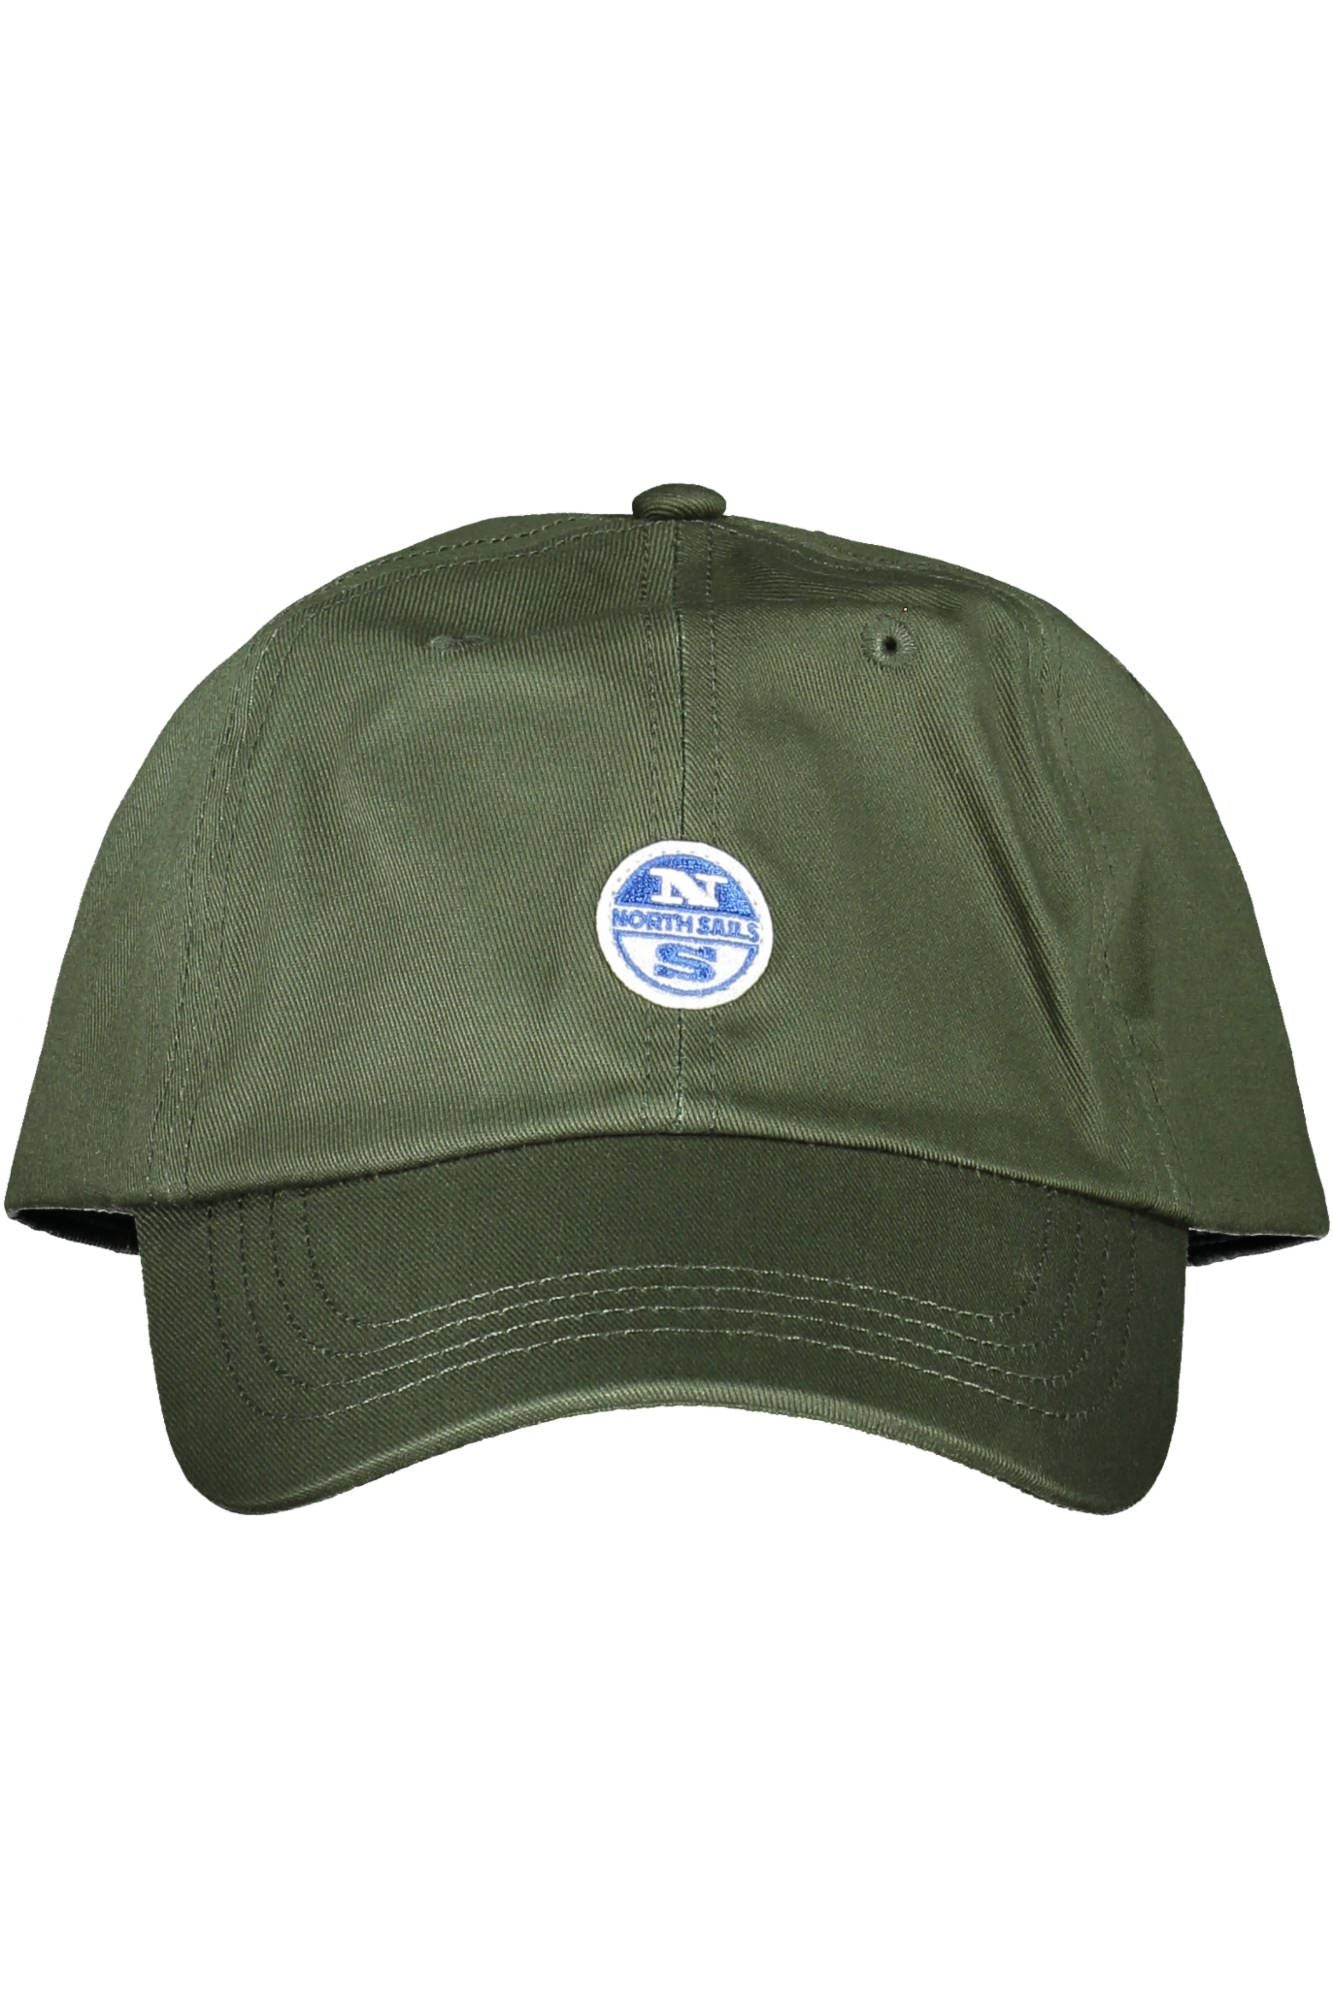 North Sails Green Cotton Cap with Visor and Logo Accent